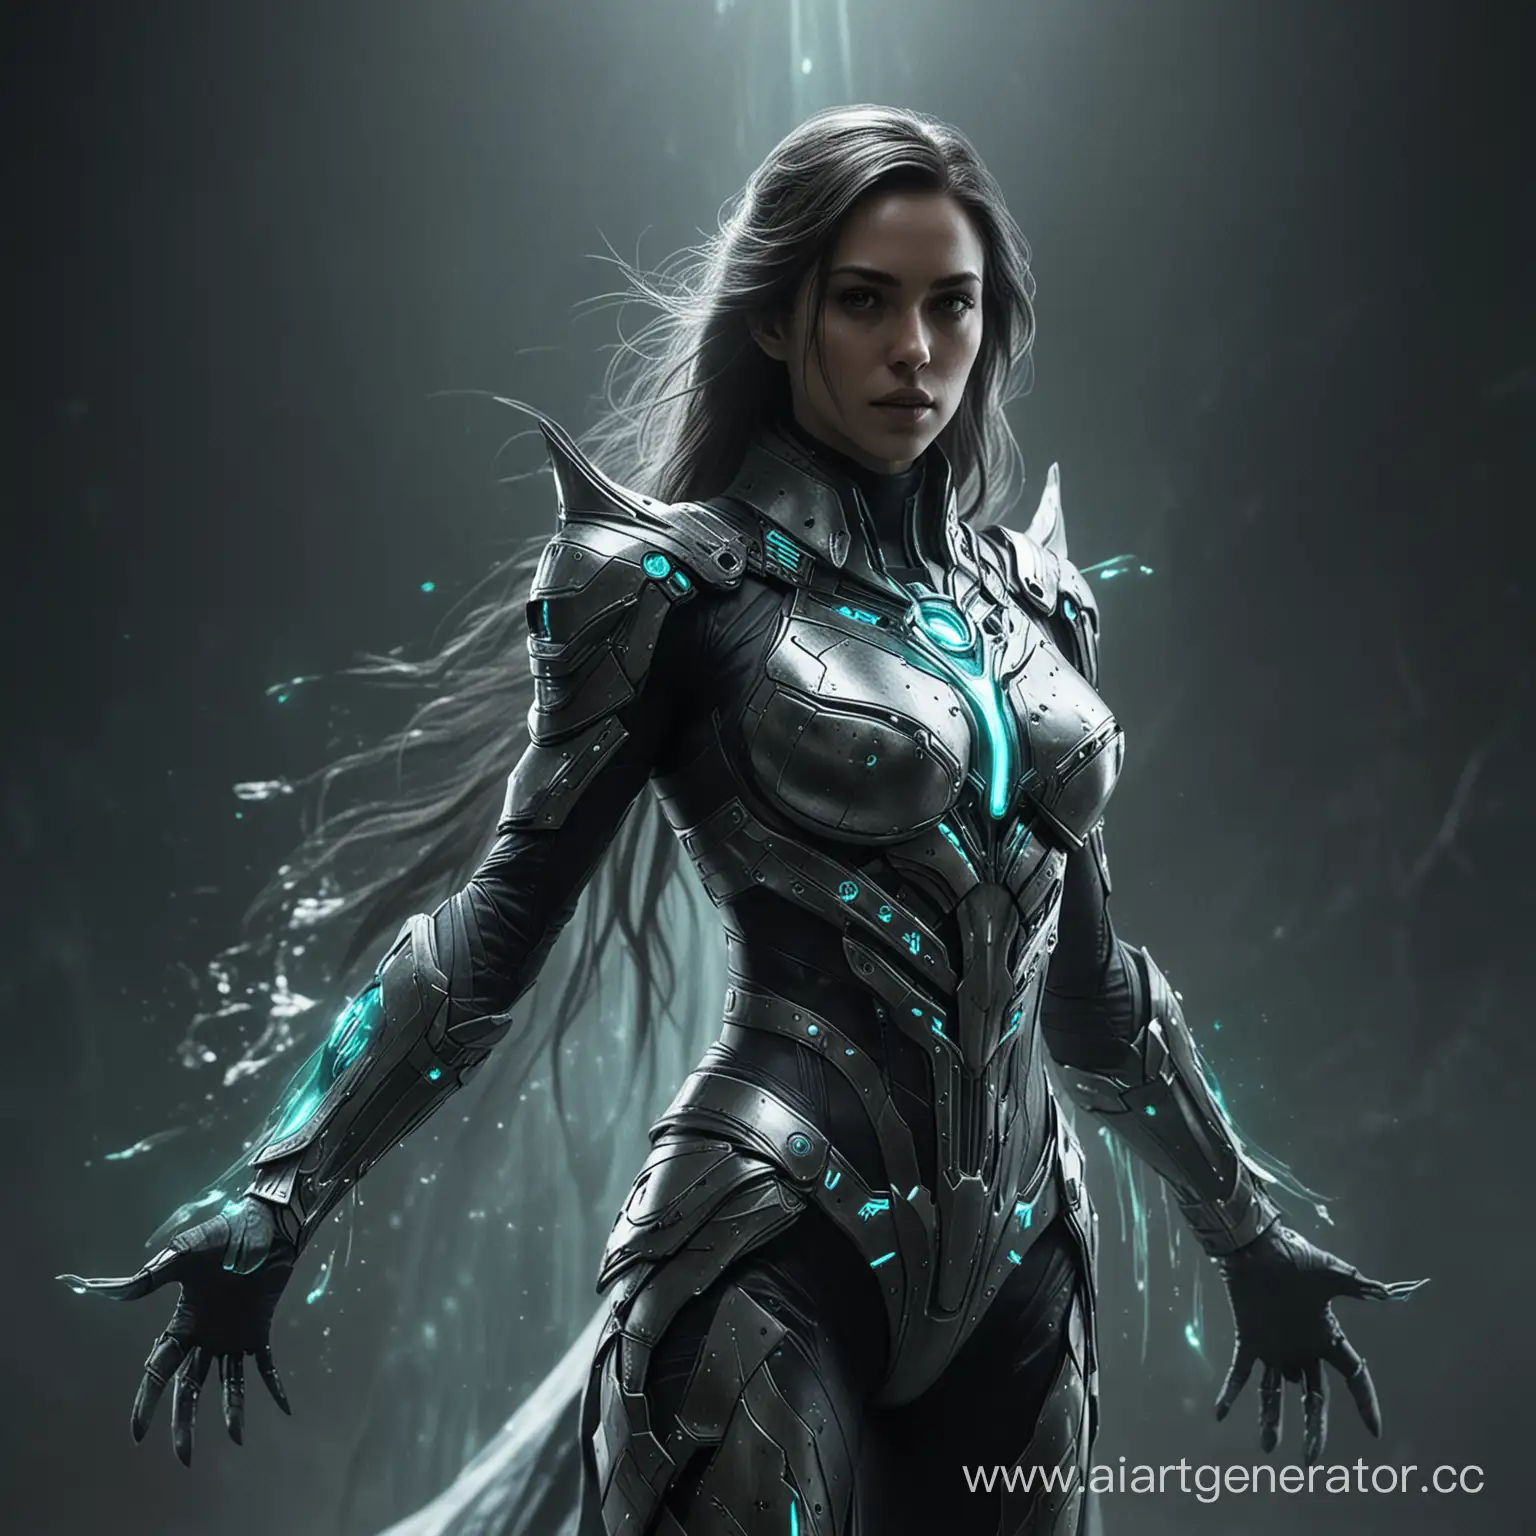 Spectral Sentinel:She is Guardian of the spirit realm, with a suit that phases in and out of existence, capable of wielding spectral energy.Make it cinematic image 